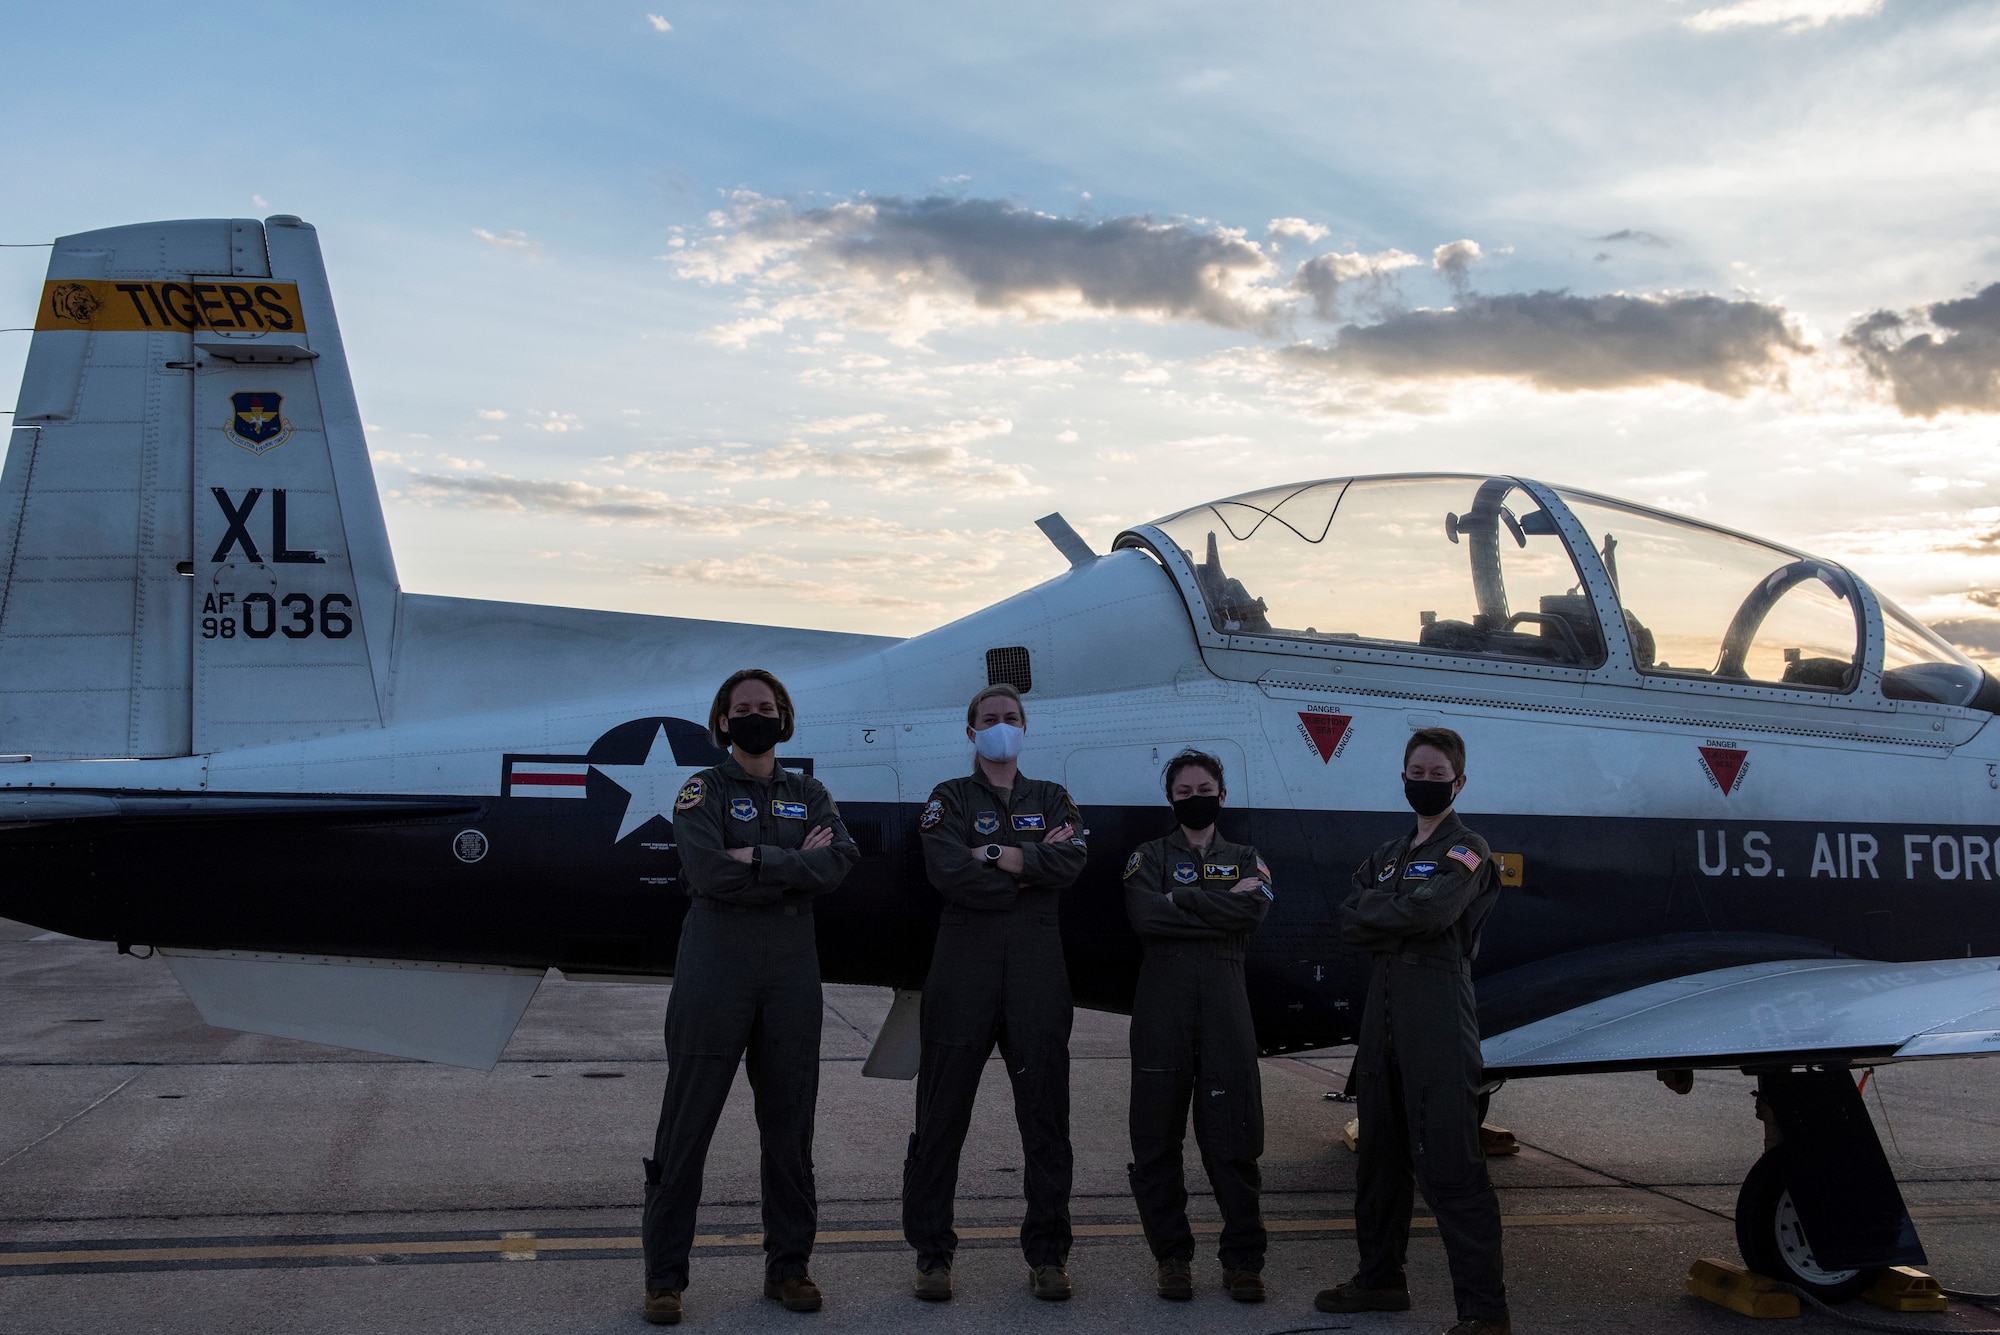 Pictured (Left to Right): Col. Cary Jones, Capt. Susan Jennie, Capt. Melany Delgado, and Maj. Emily Brown stands in front of a T-6 Texan II. The T-6 is the first aircraft all pilots must fly during there training during their time at Laughlin.(Courtesy photo taken by 2nd Lt. Esther Min)